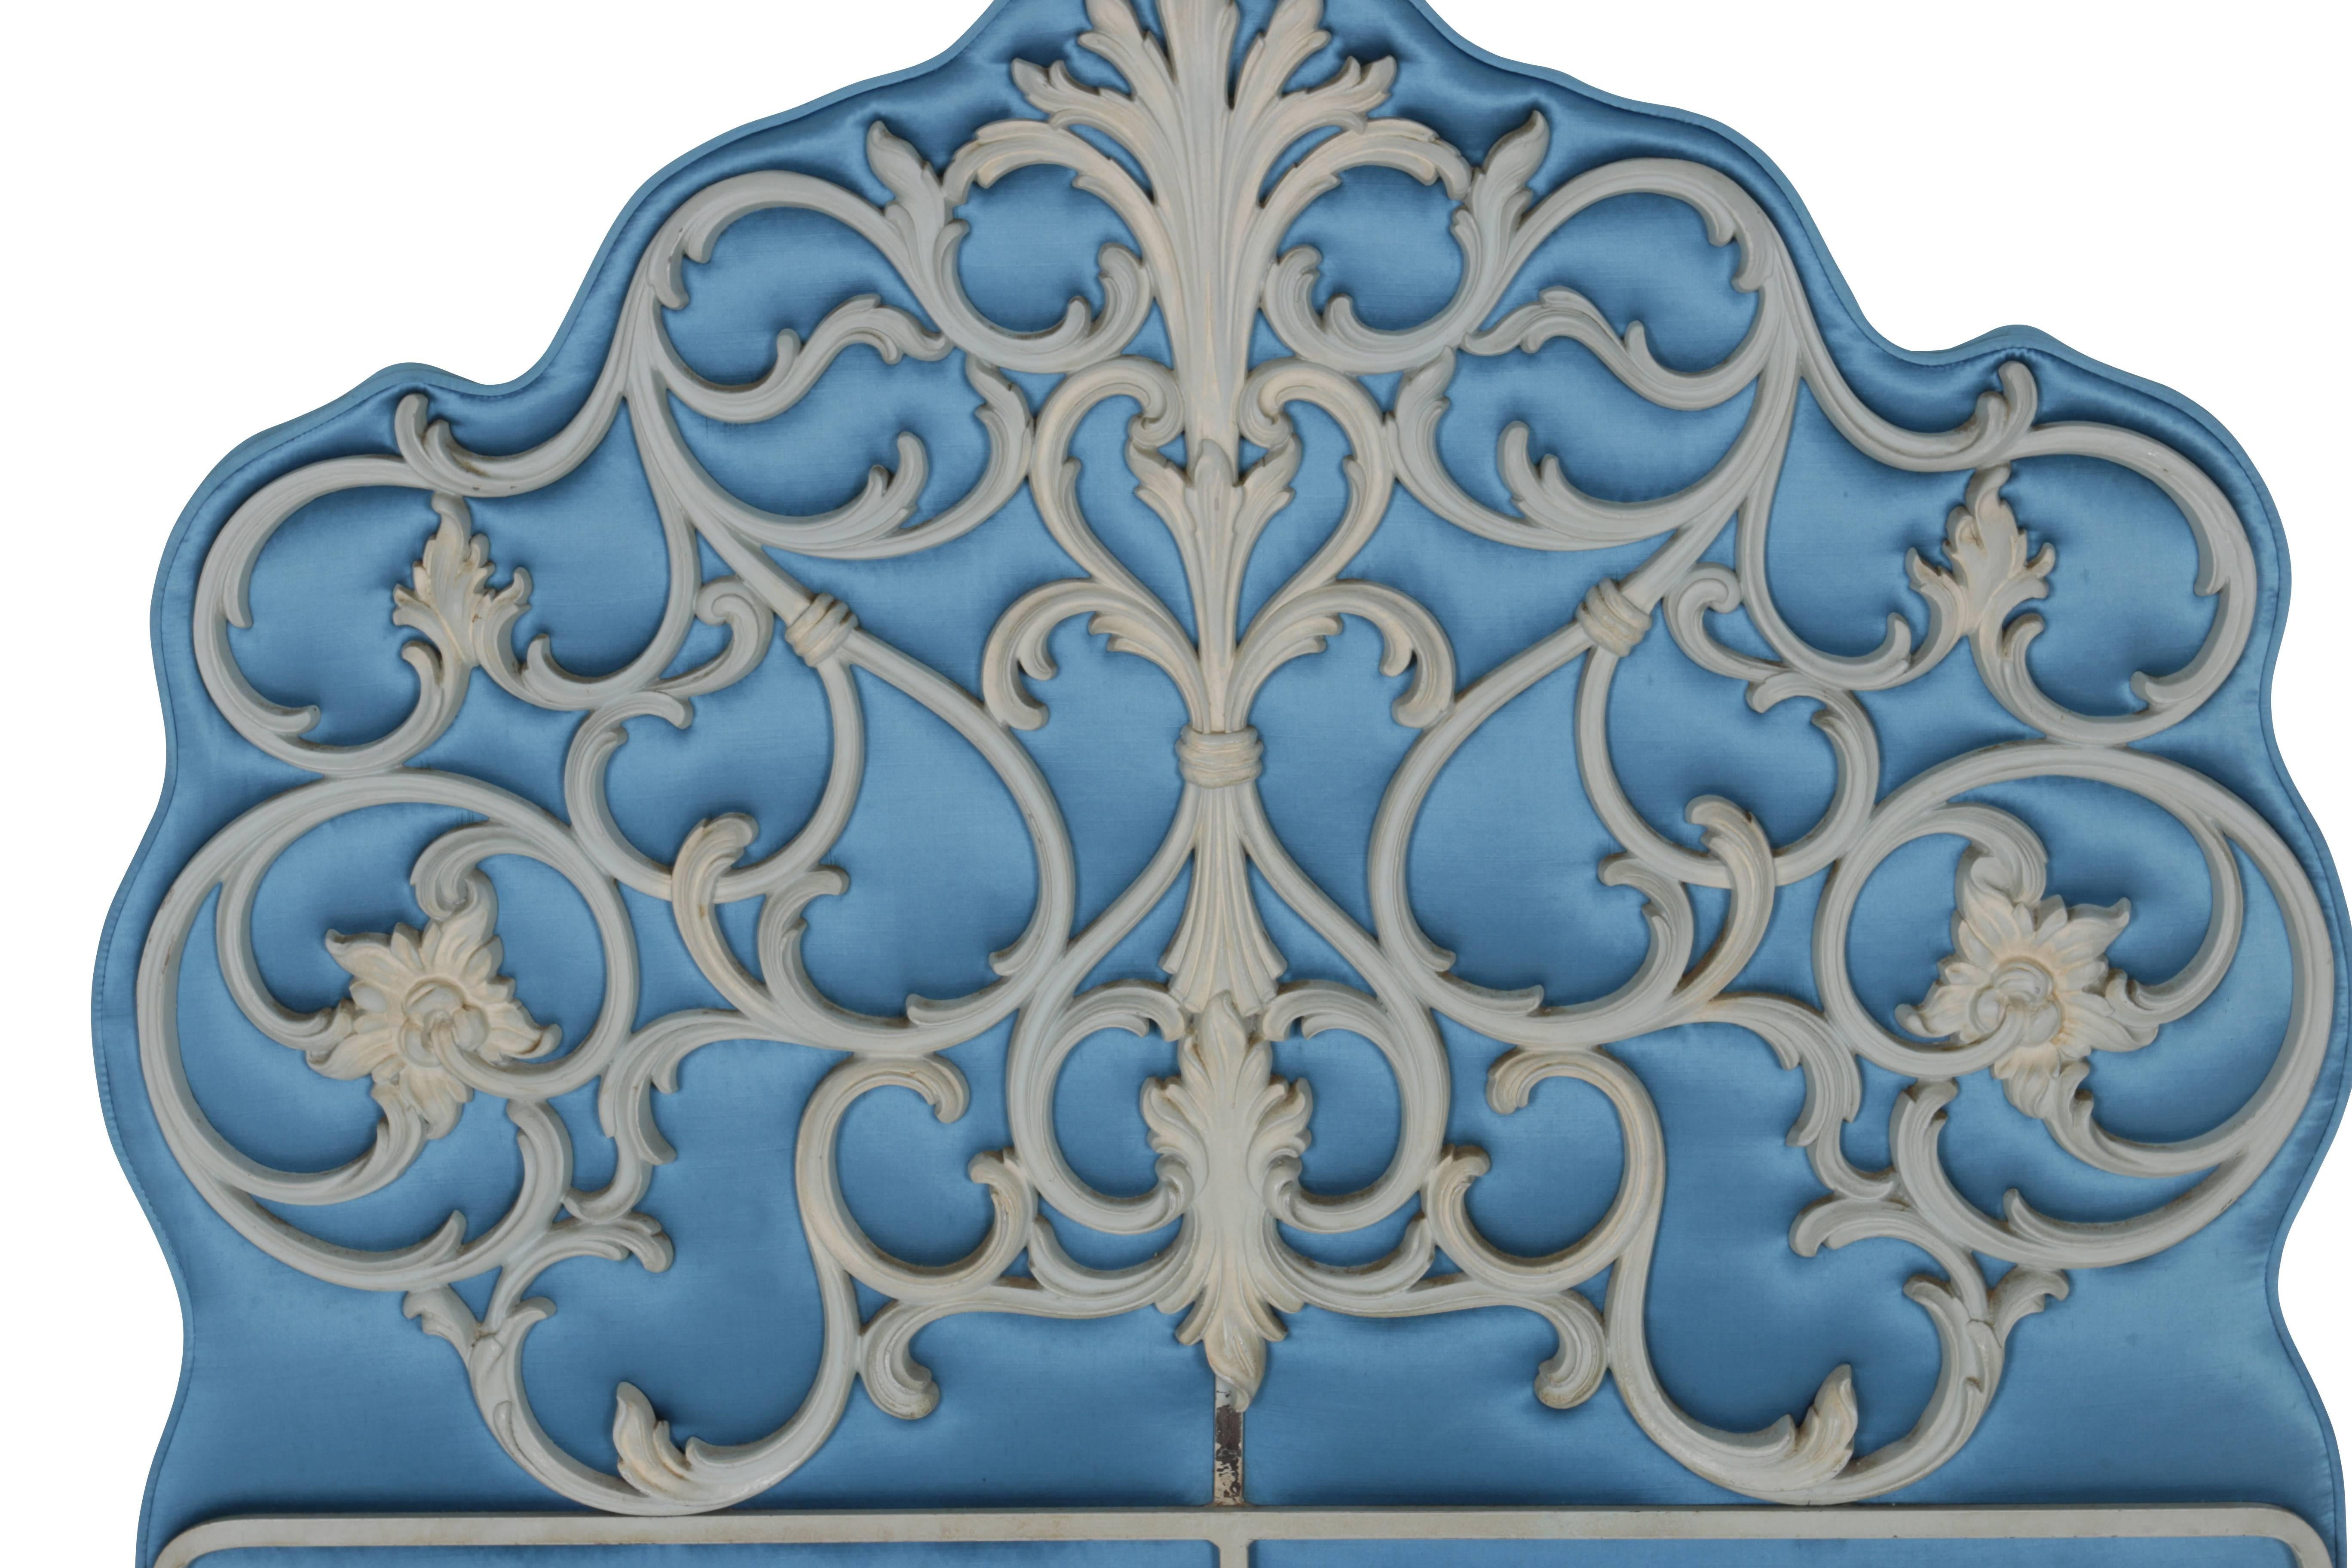 Fantastic pair of twin-size headboards in bluejay blue padded silk fabric with ornate metal fleur-de-lis design and swirls. Heavy gage metal and padding make these headboards strong and weighty. Can mount directly to bed frame or can be leaning